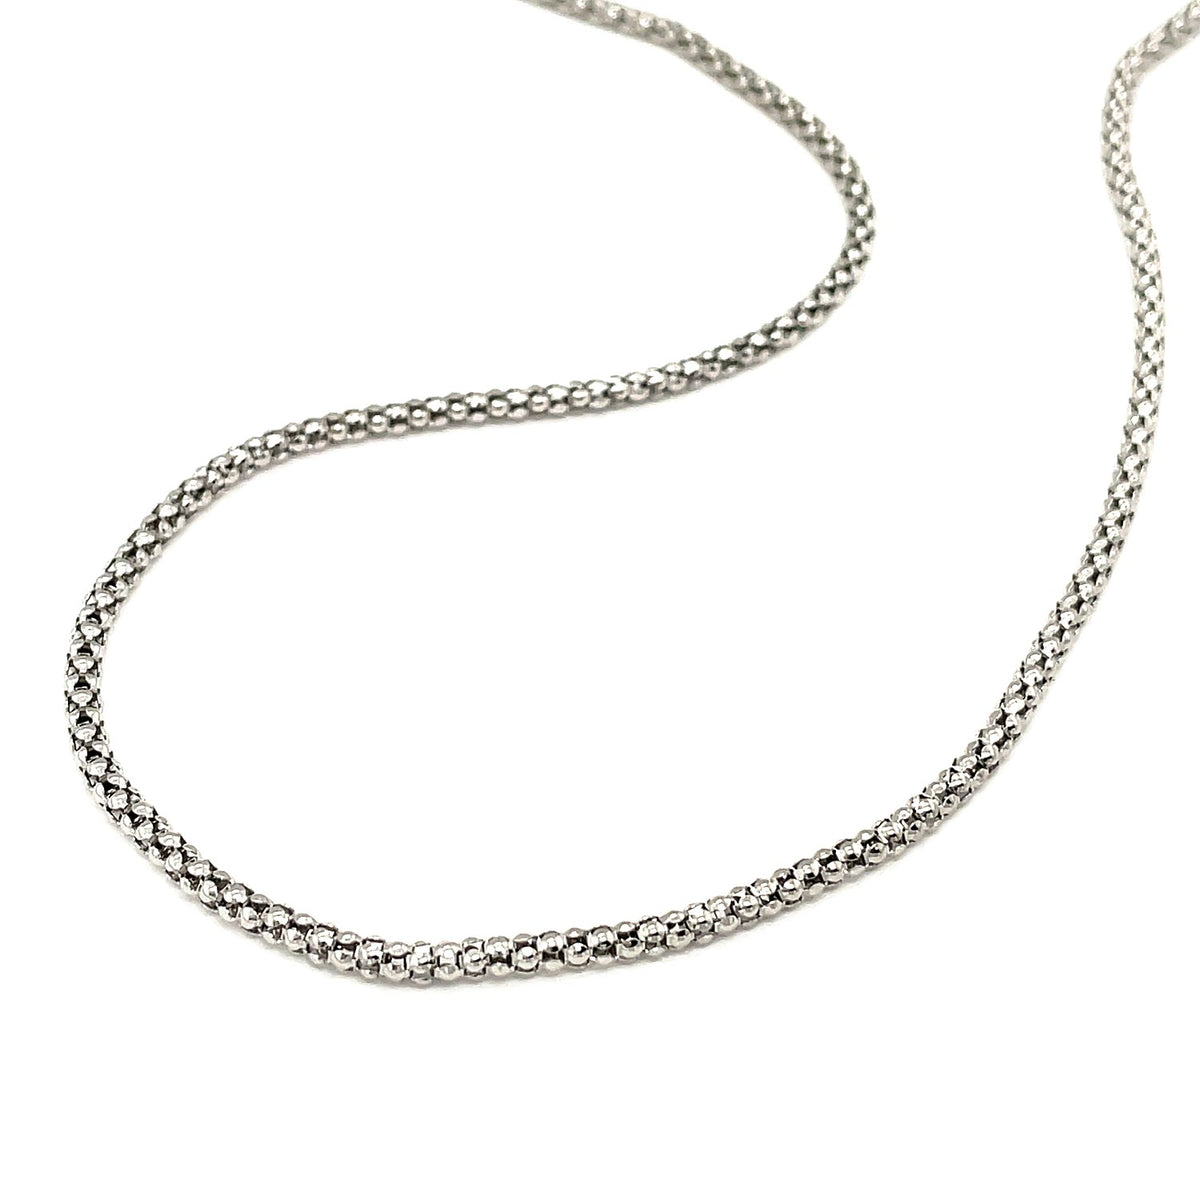 Popcorn Style Chain - Sterling Silver 2.50mm